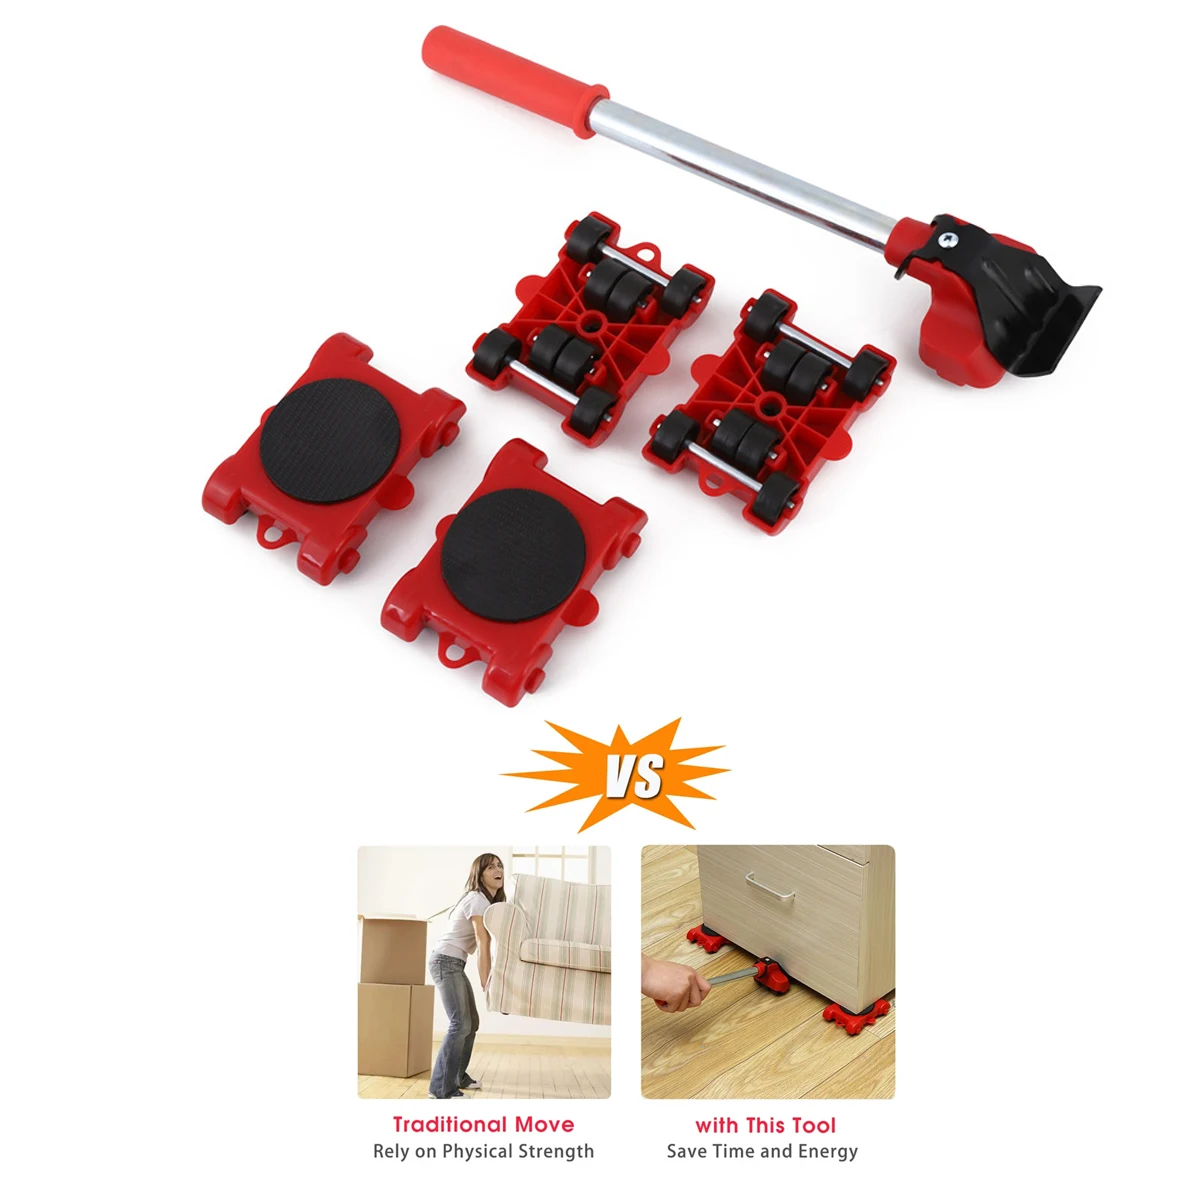 

New Heavy Duty Furniture Lifter Transport Tool Furniture Mover set 4 Move Roller 1 Wheel Bar for Lifting Moving Furniture Helper